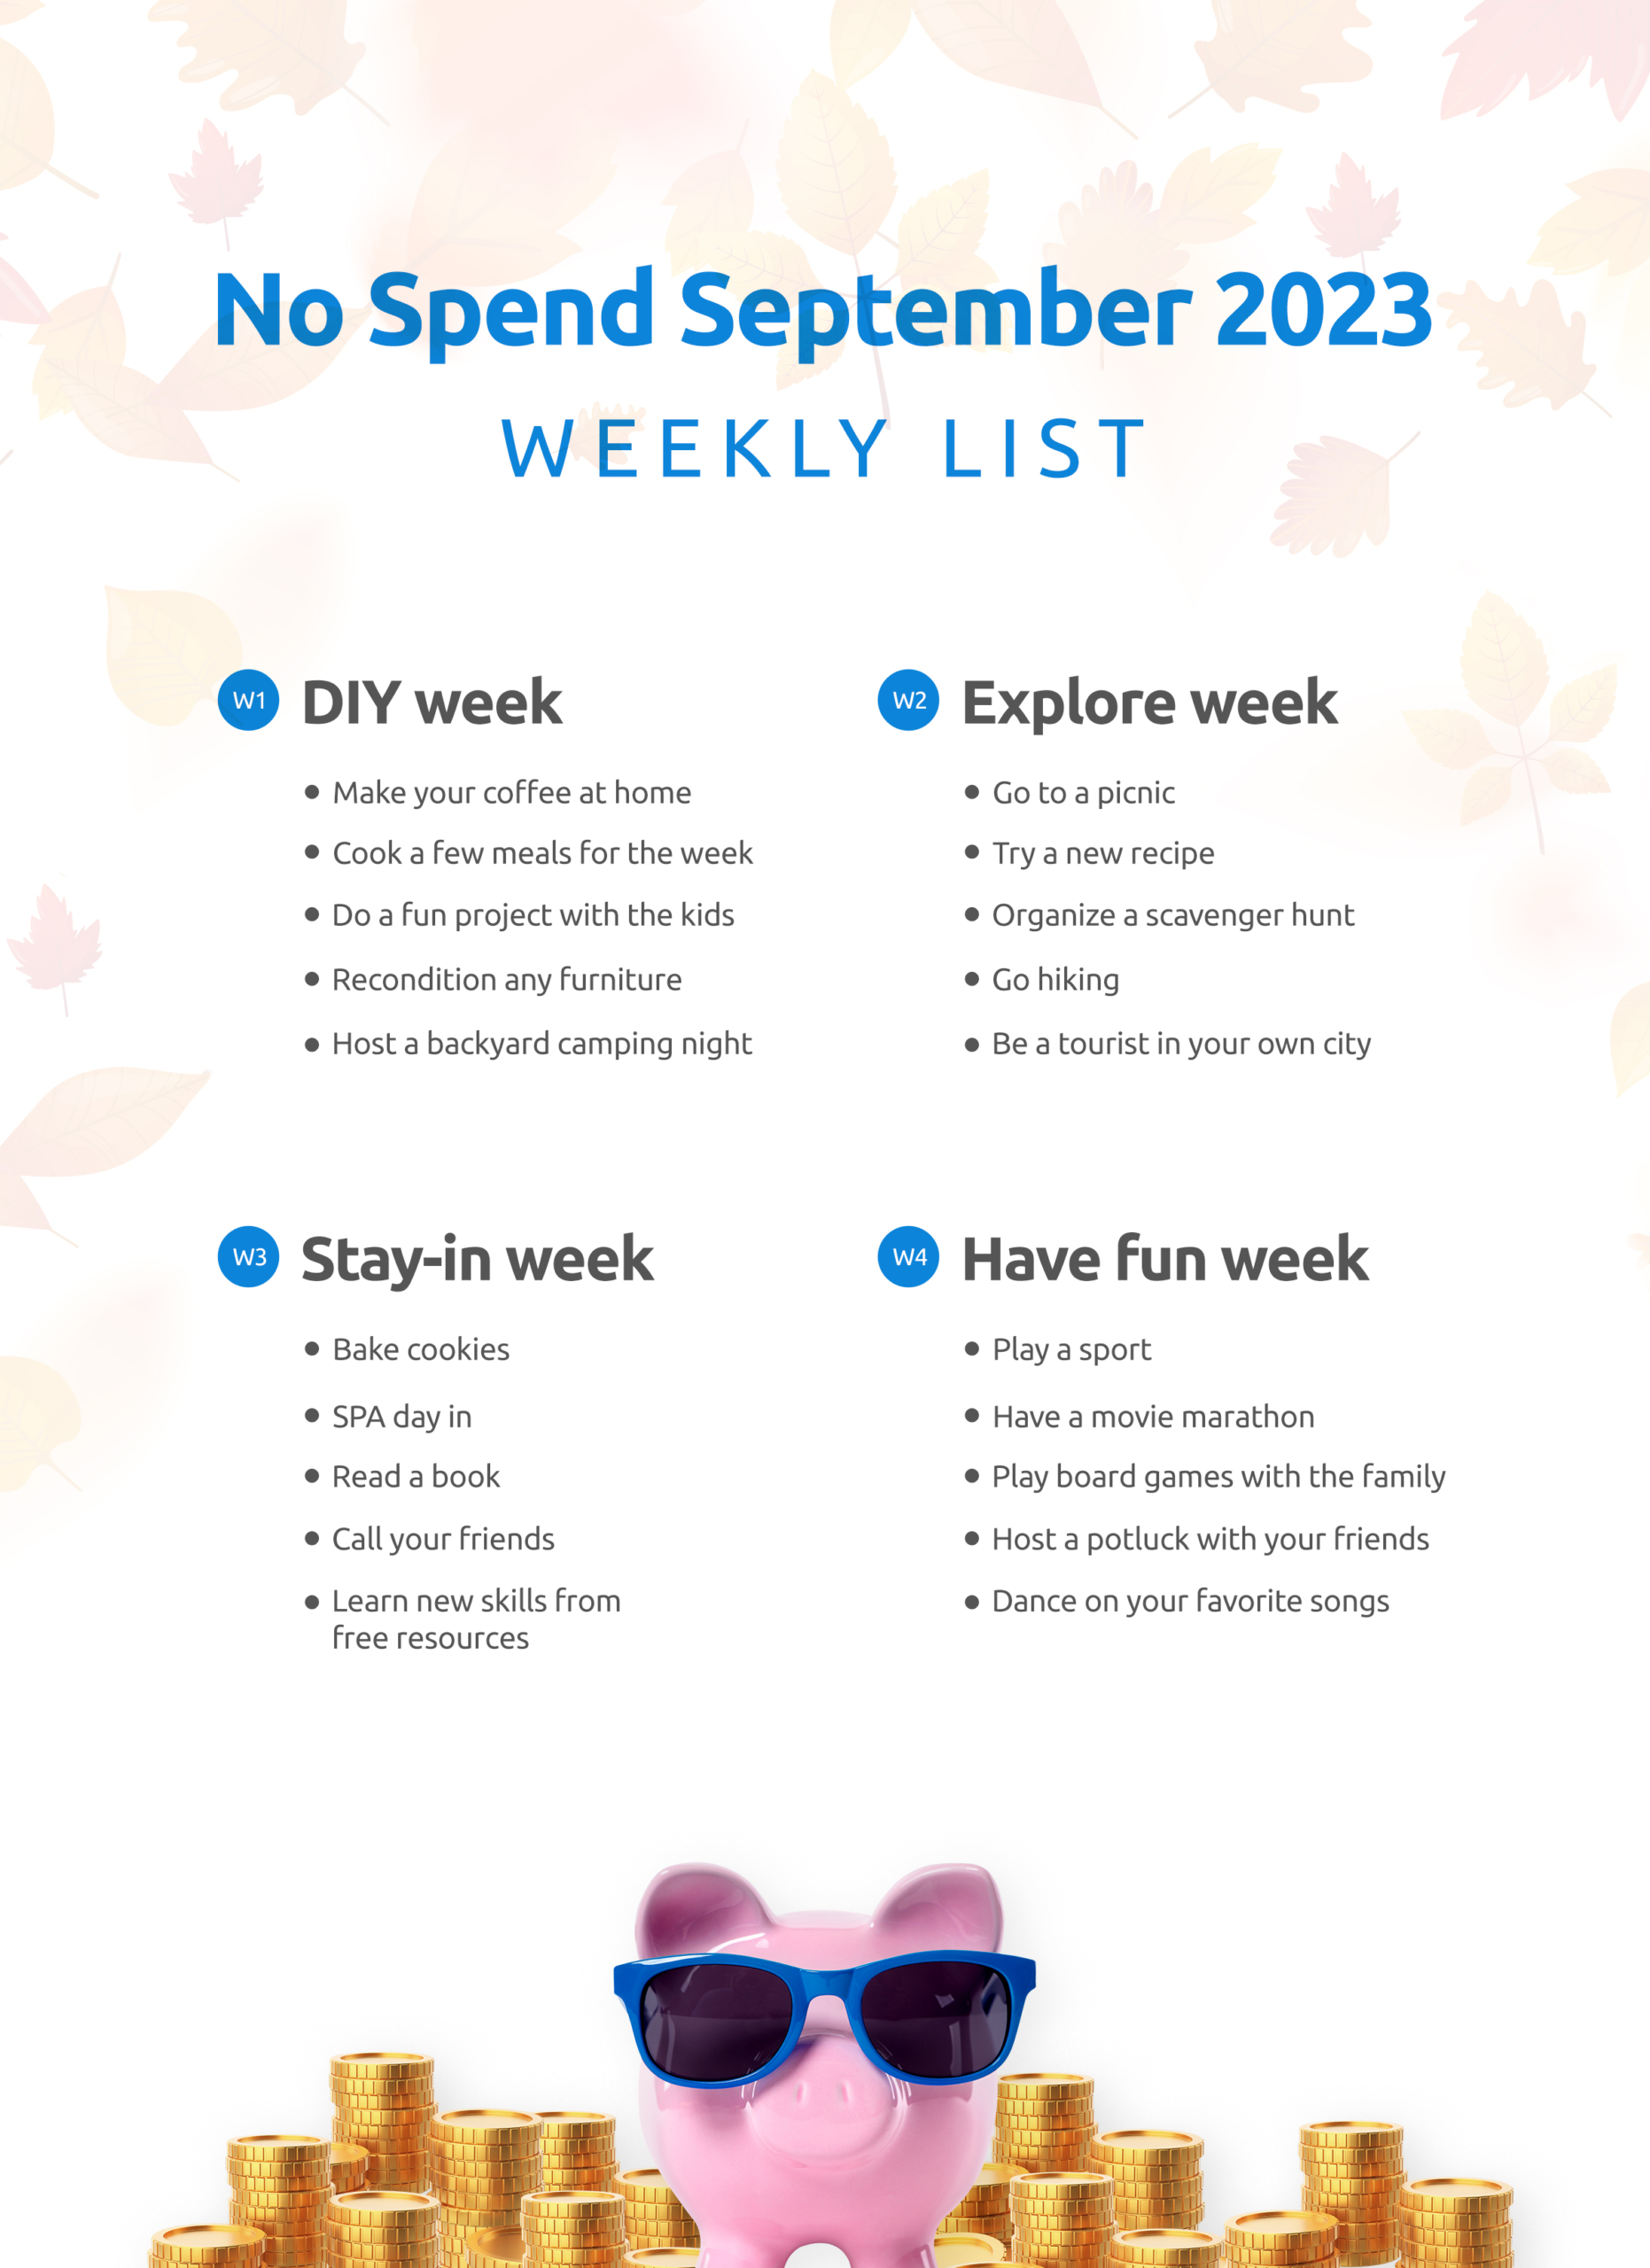 No Spend September weekly list